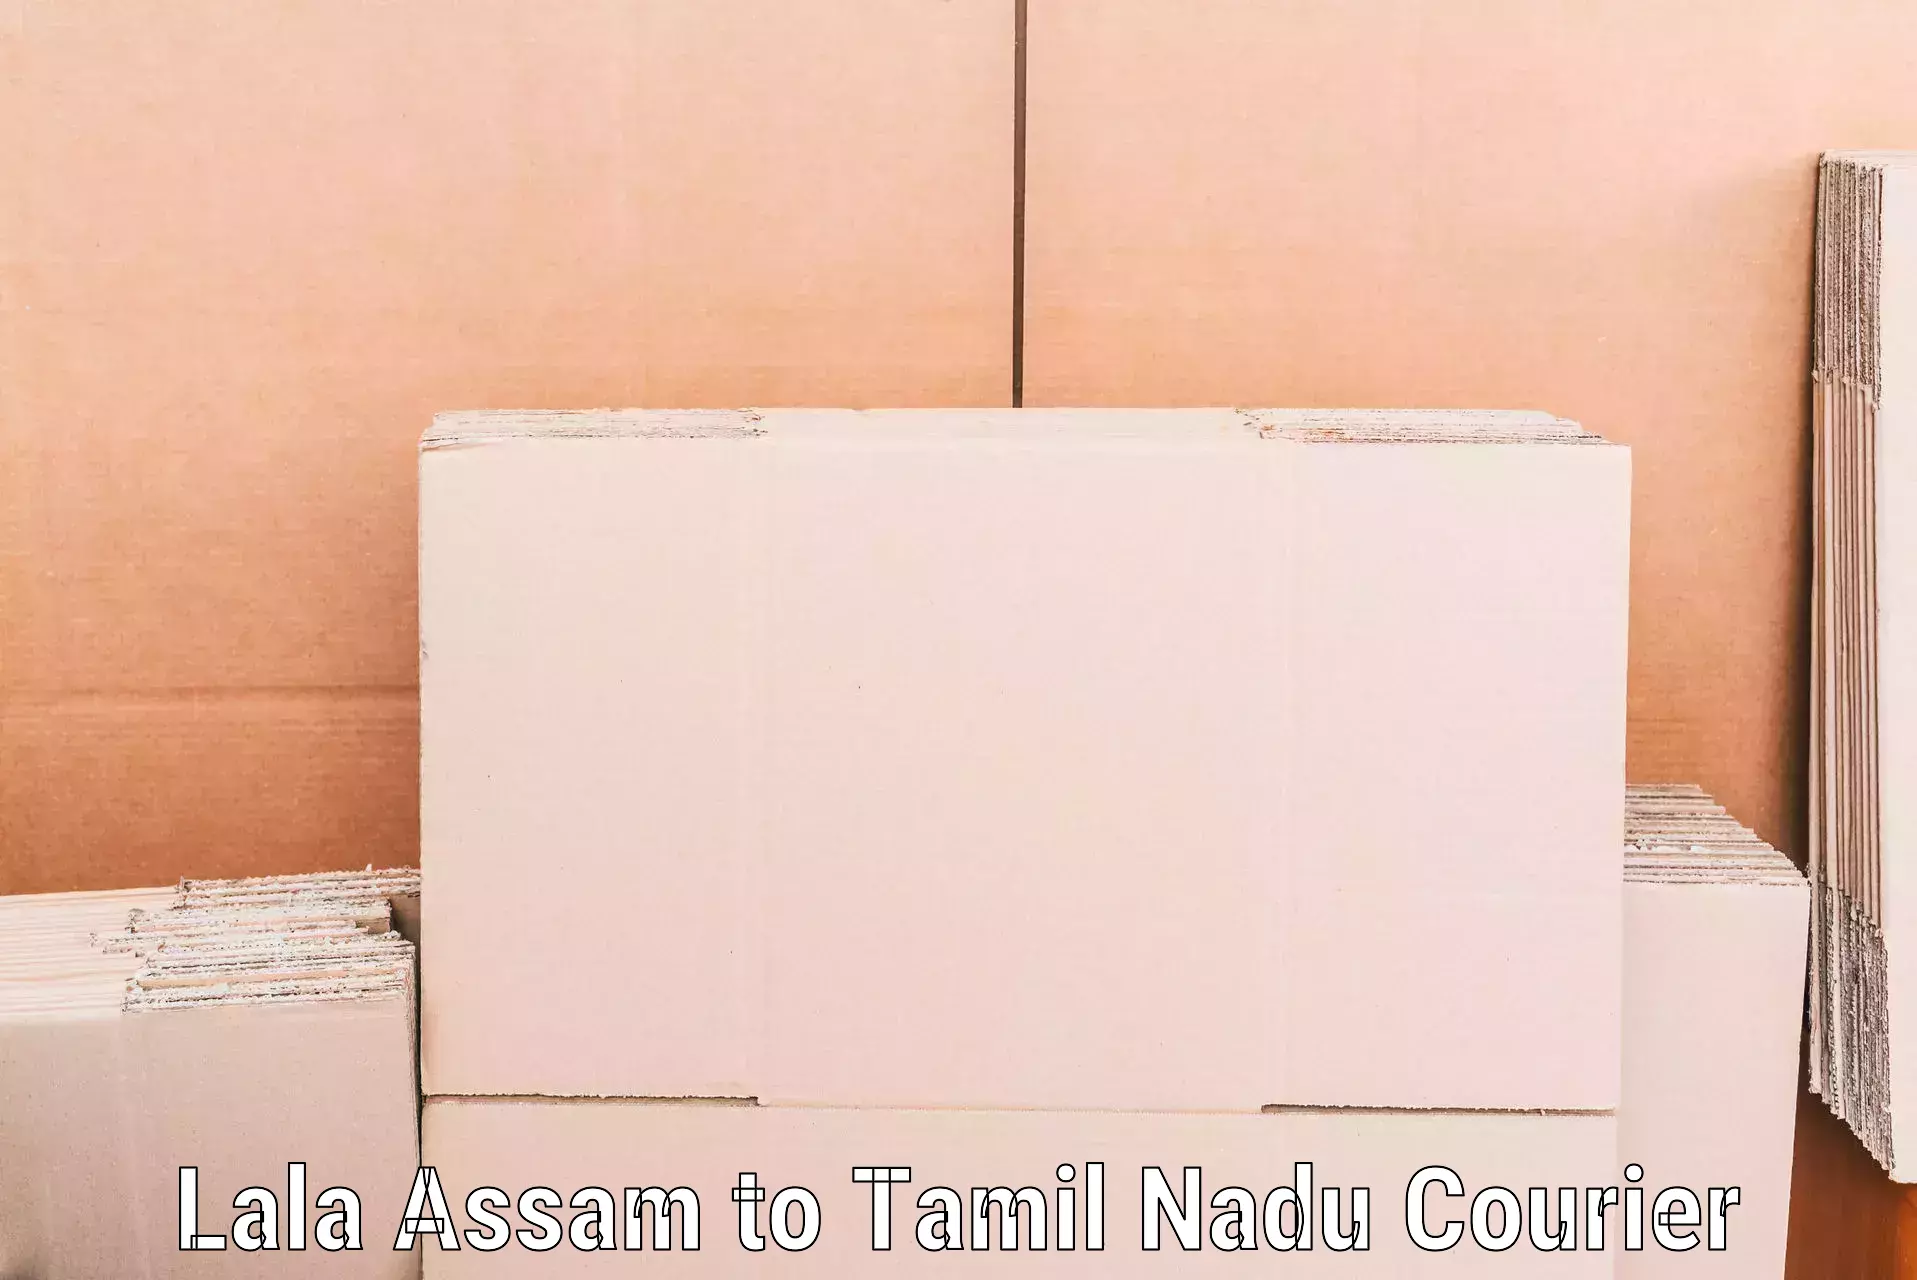 Comprehensive moving assistance in Lala Assam to Thanjavur